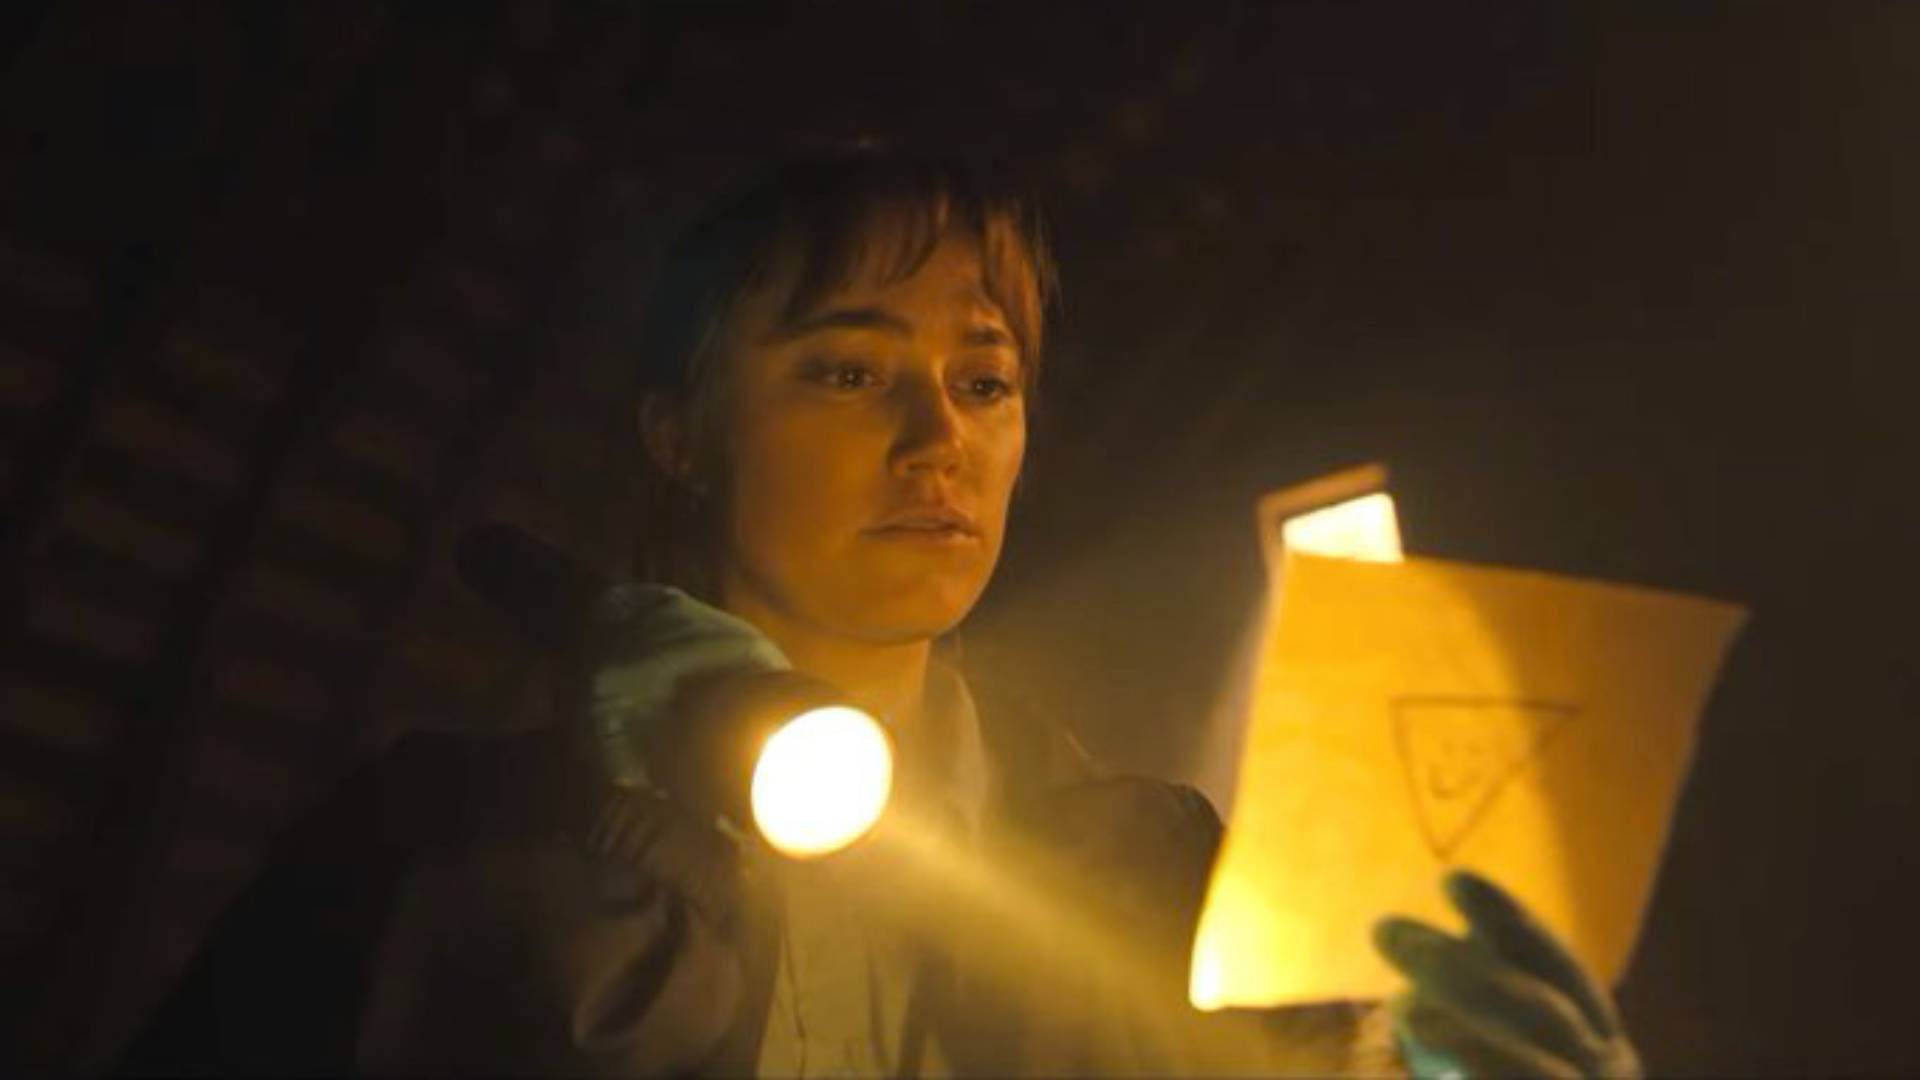 The scariest movie of the summer starring Nicolas Cage as a serial killer just got a disturbing new trailer